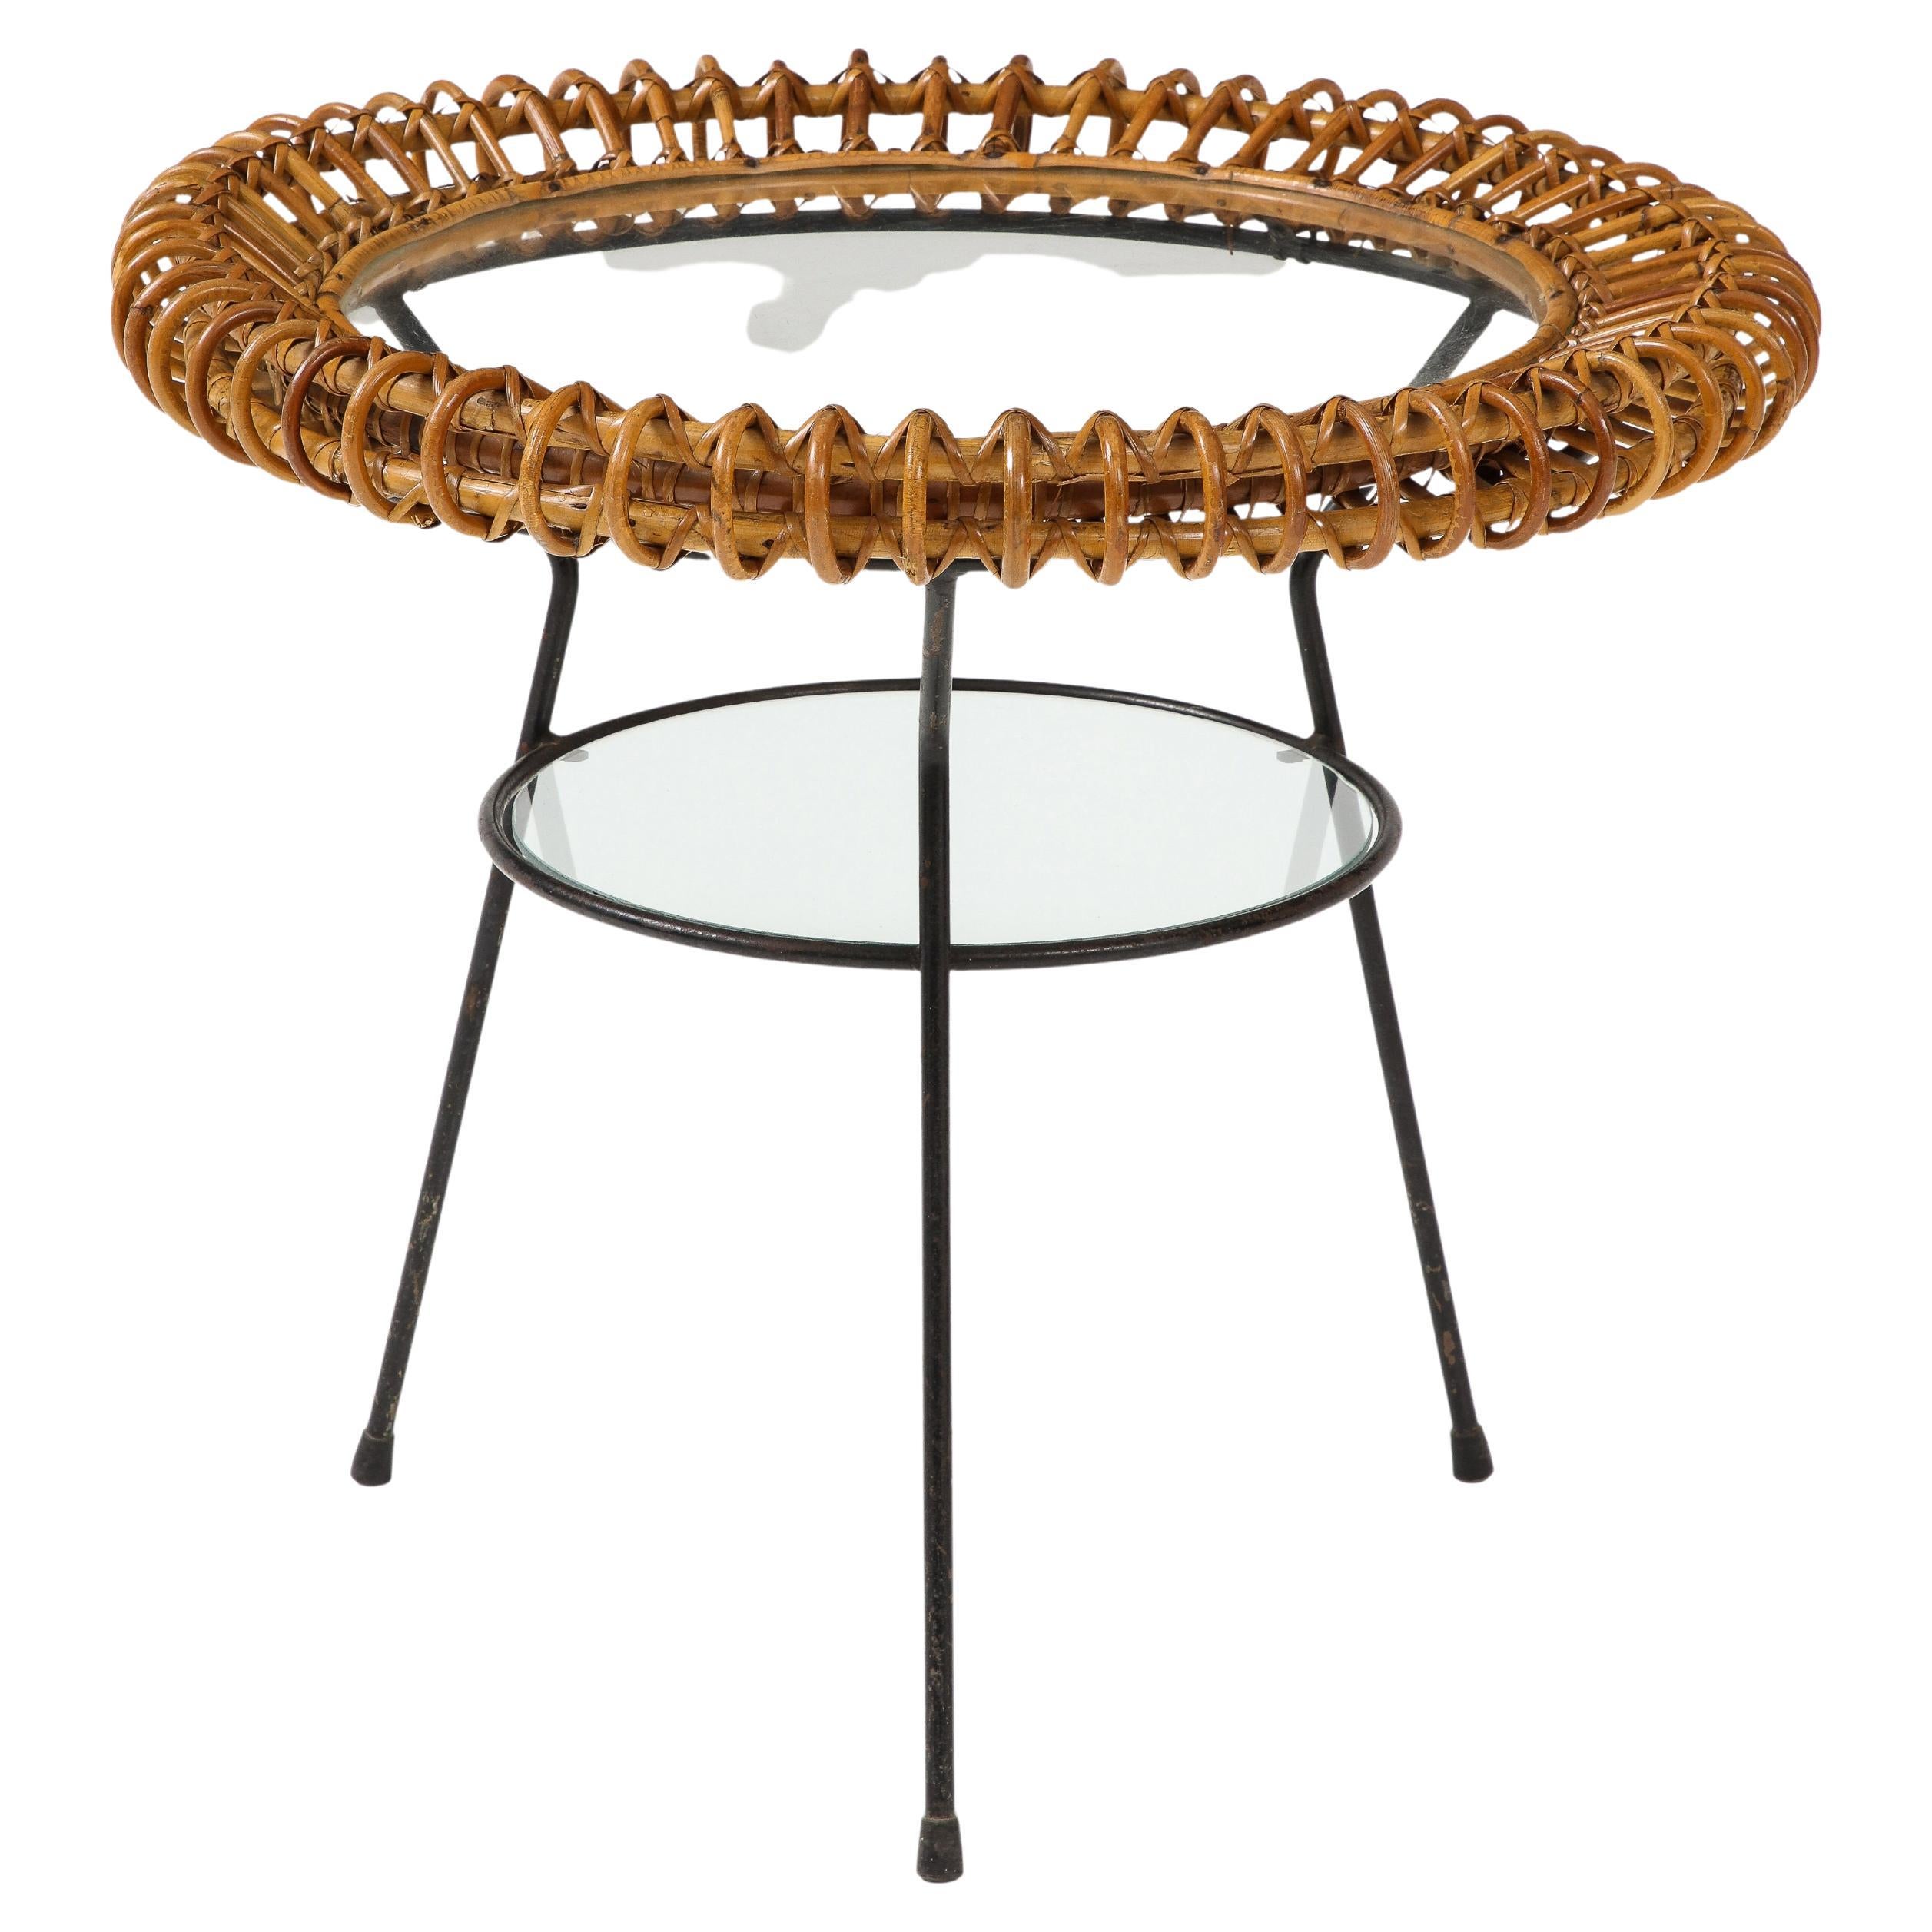 Two-Tier Glass Side Table in Bamboo, Rattan, and Metal